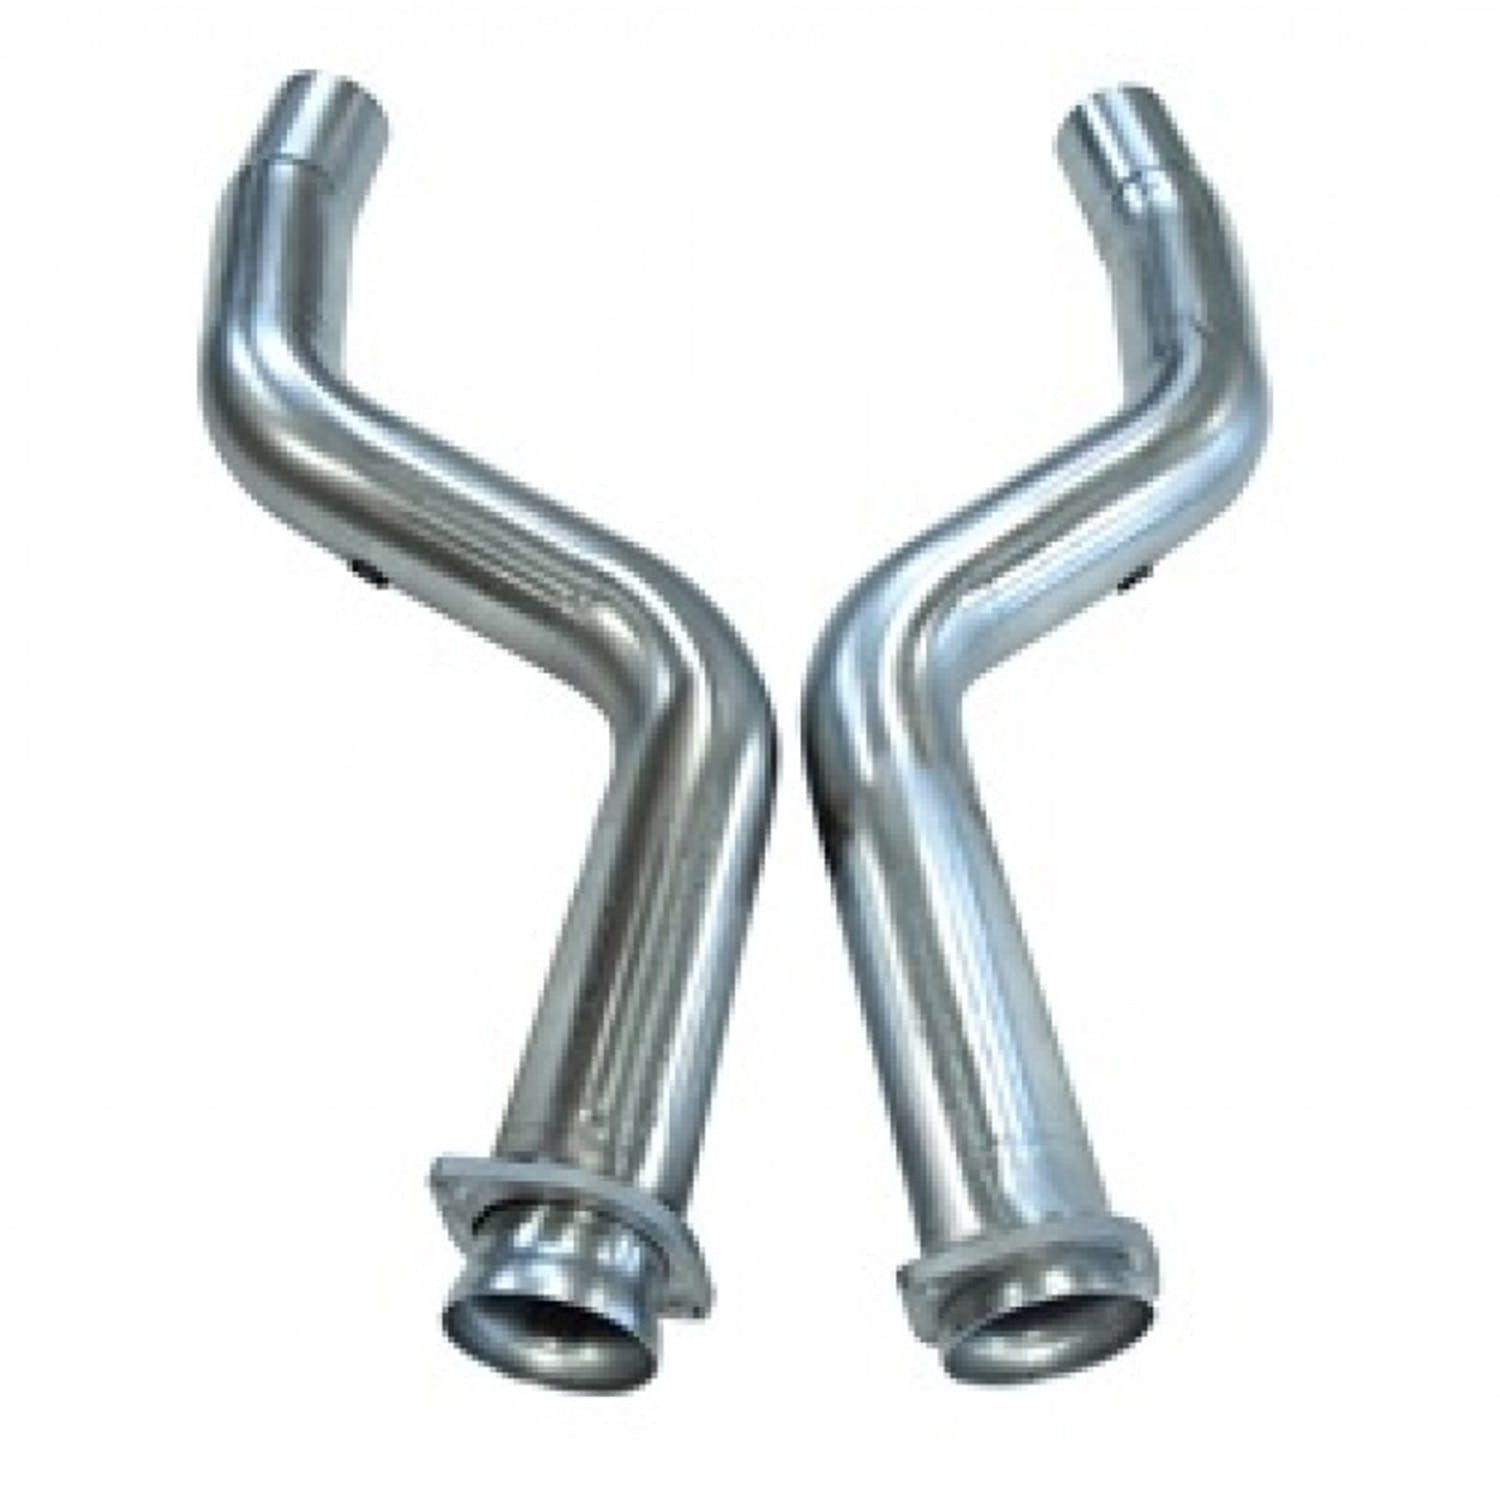 Kooks Custom Headers 31023100 Off Road Connection Pipes